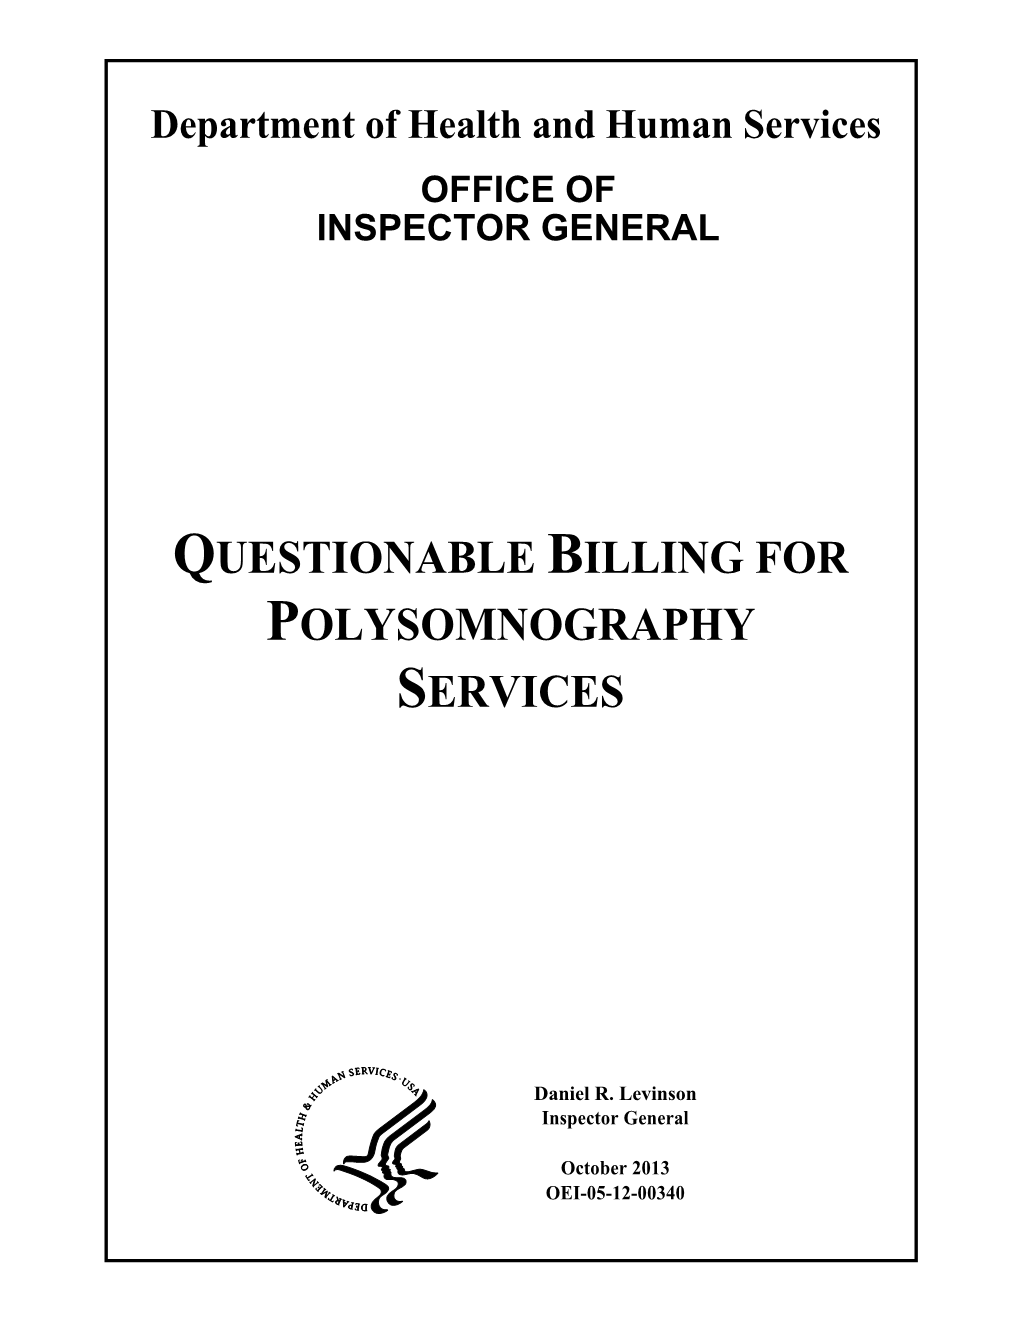 Questionable Billing for Polysomnography Services, OEI-05-12-00340